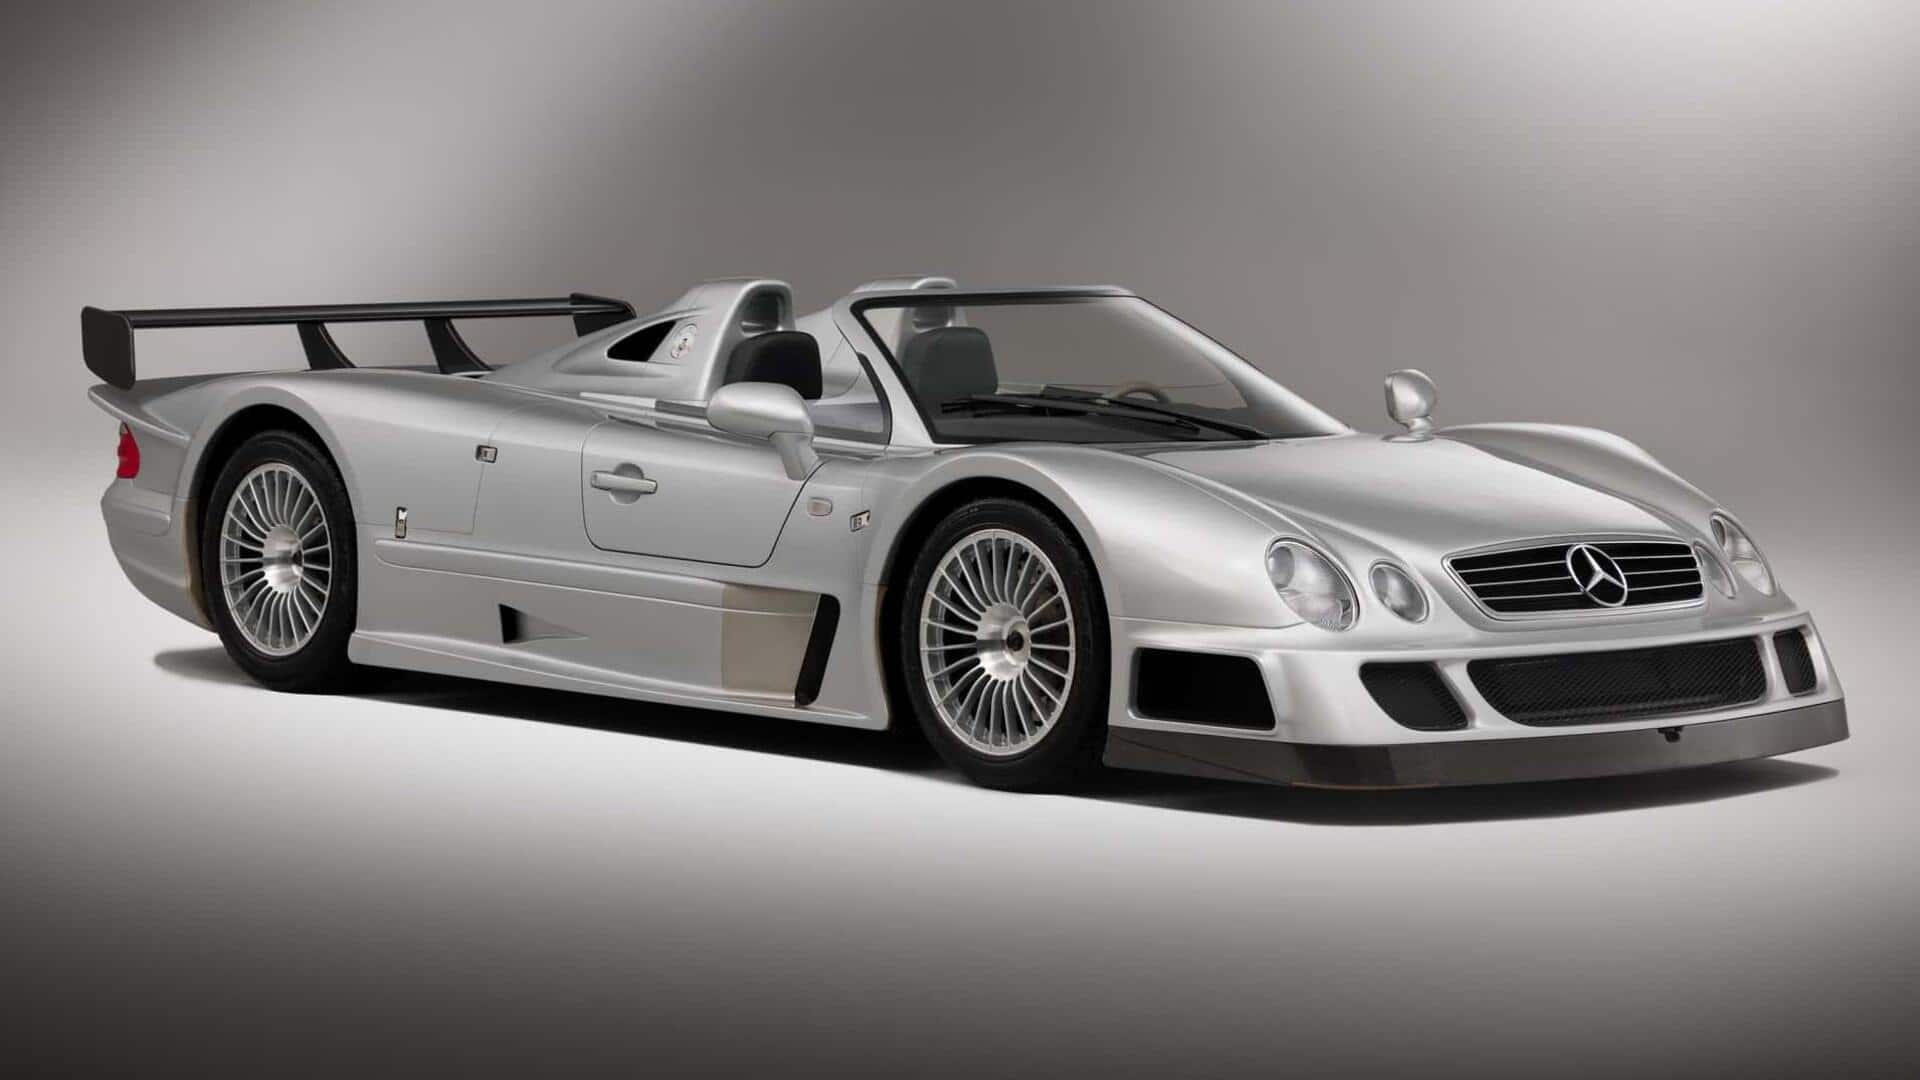 Super-exclusive Mercedes-Benz CLK GTR Roadster could sell for $13mn